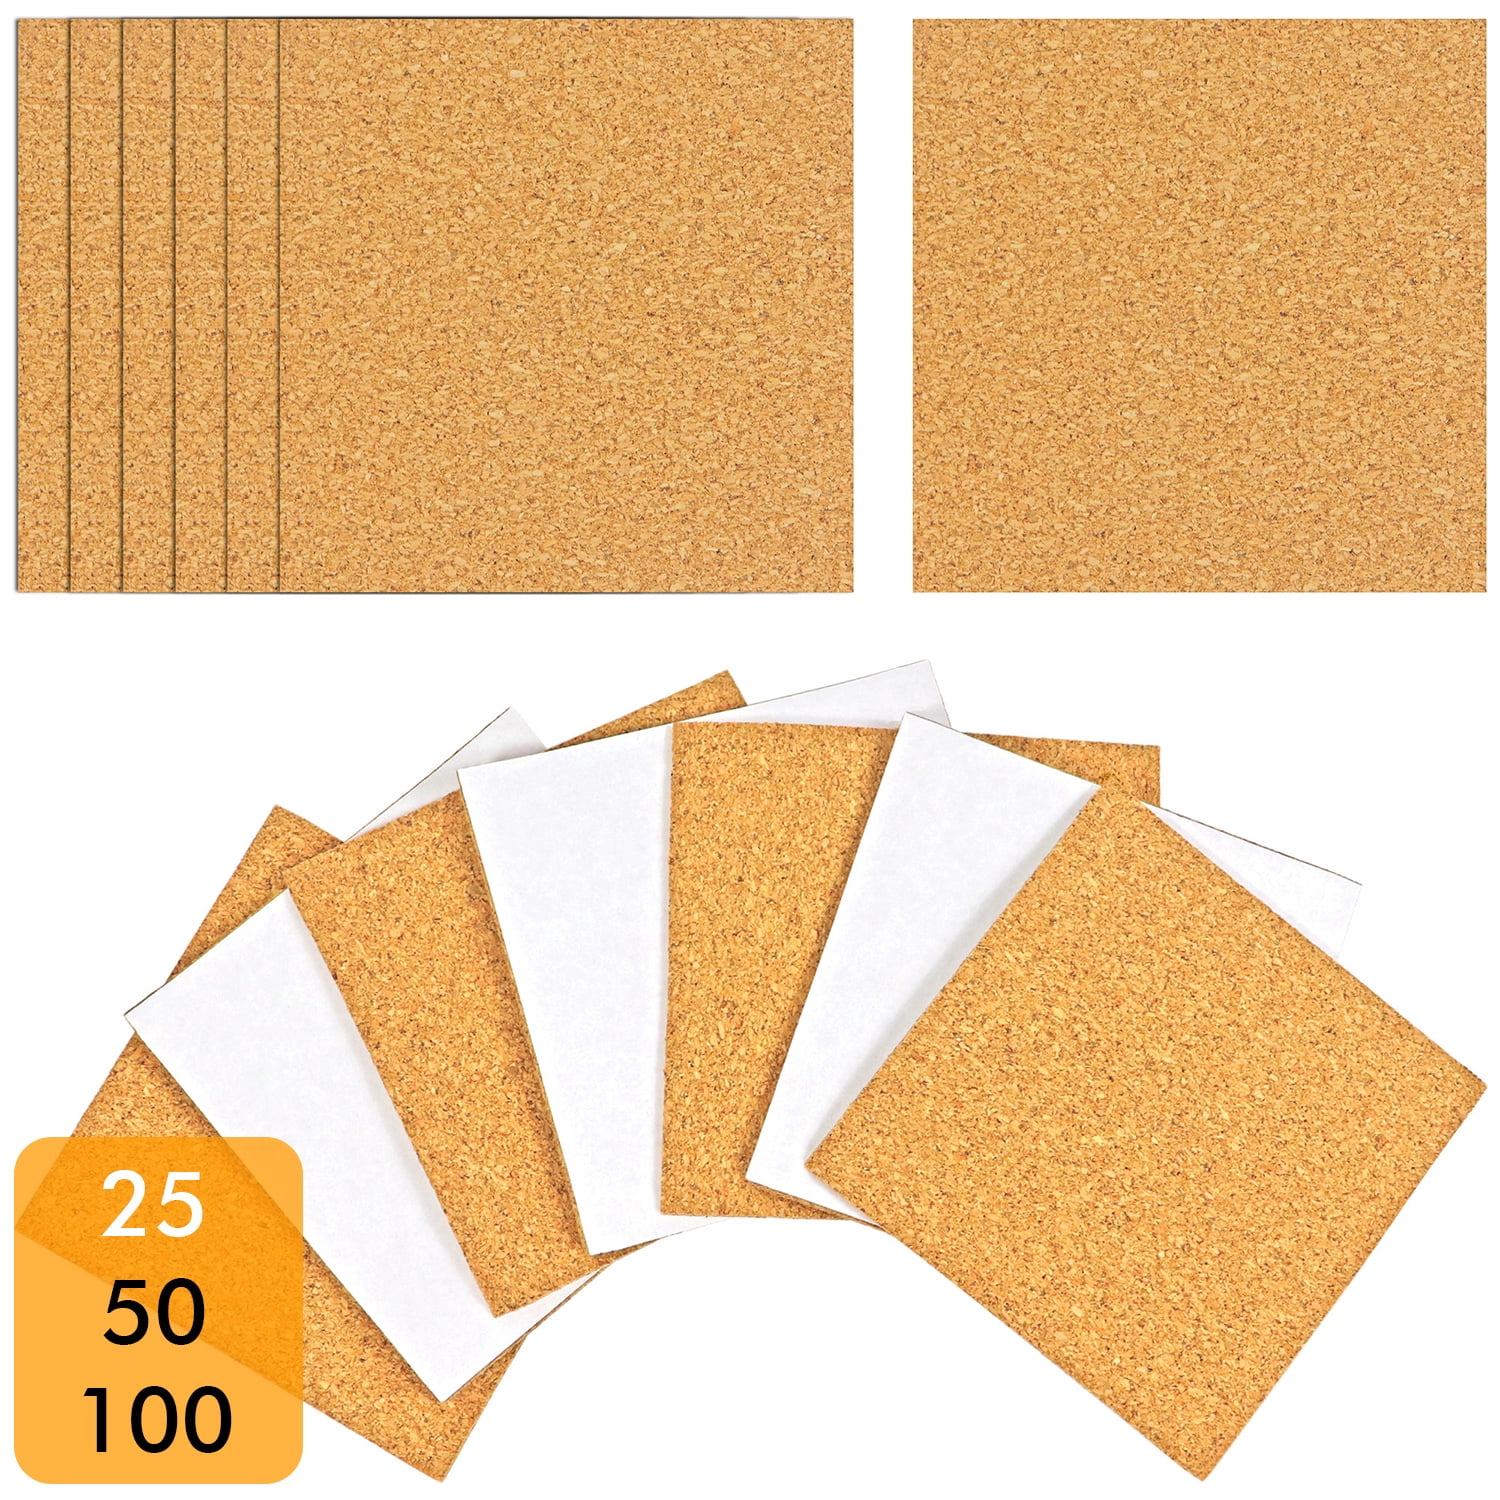 Spencer 30 Pack Self-Adhesive Cork Squares Cork Tiles Resuable Cork Backing  Sheets for Coasters and DIY Crafts, 4x4 Inches 